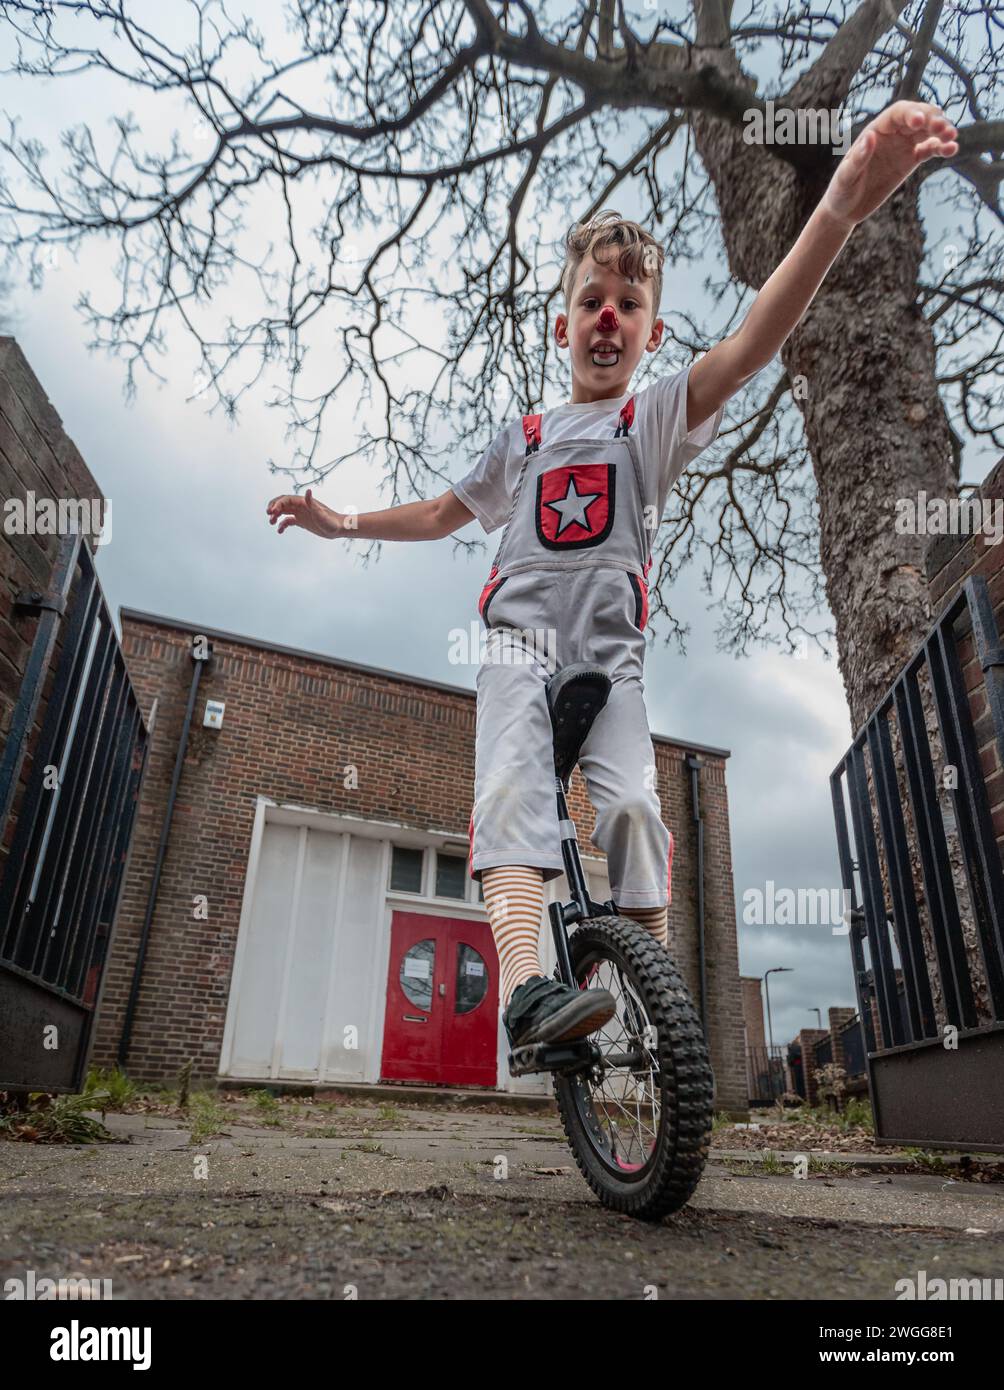 A young clown rides a unicycle at the Joseph Grimaldi event. Stock Photo